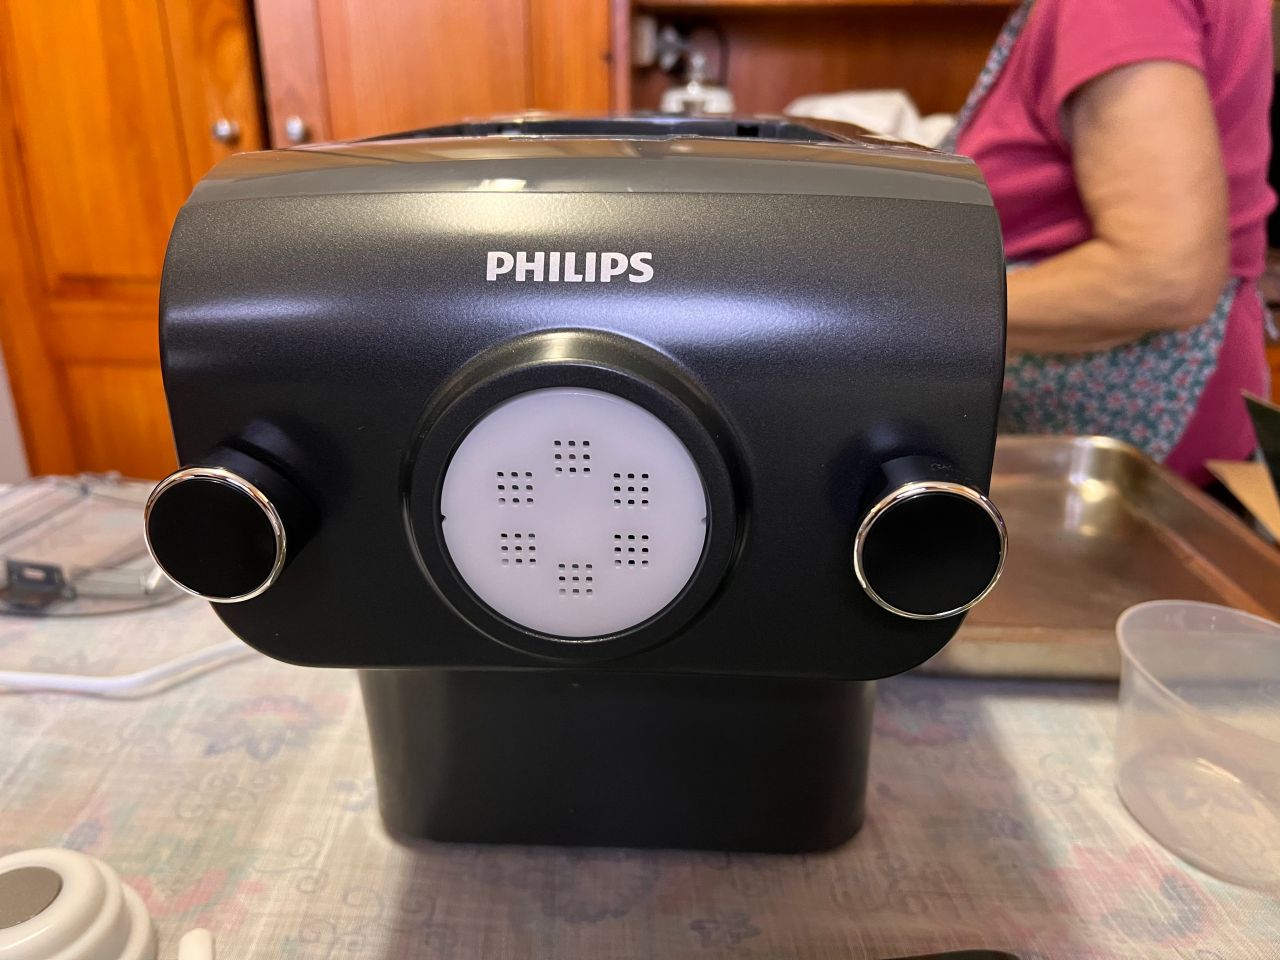 Philips Maker Review: My I Tested The Machine Out